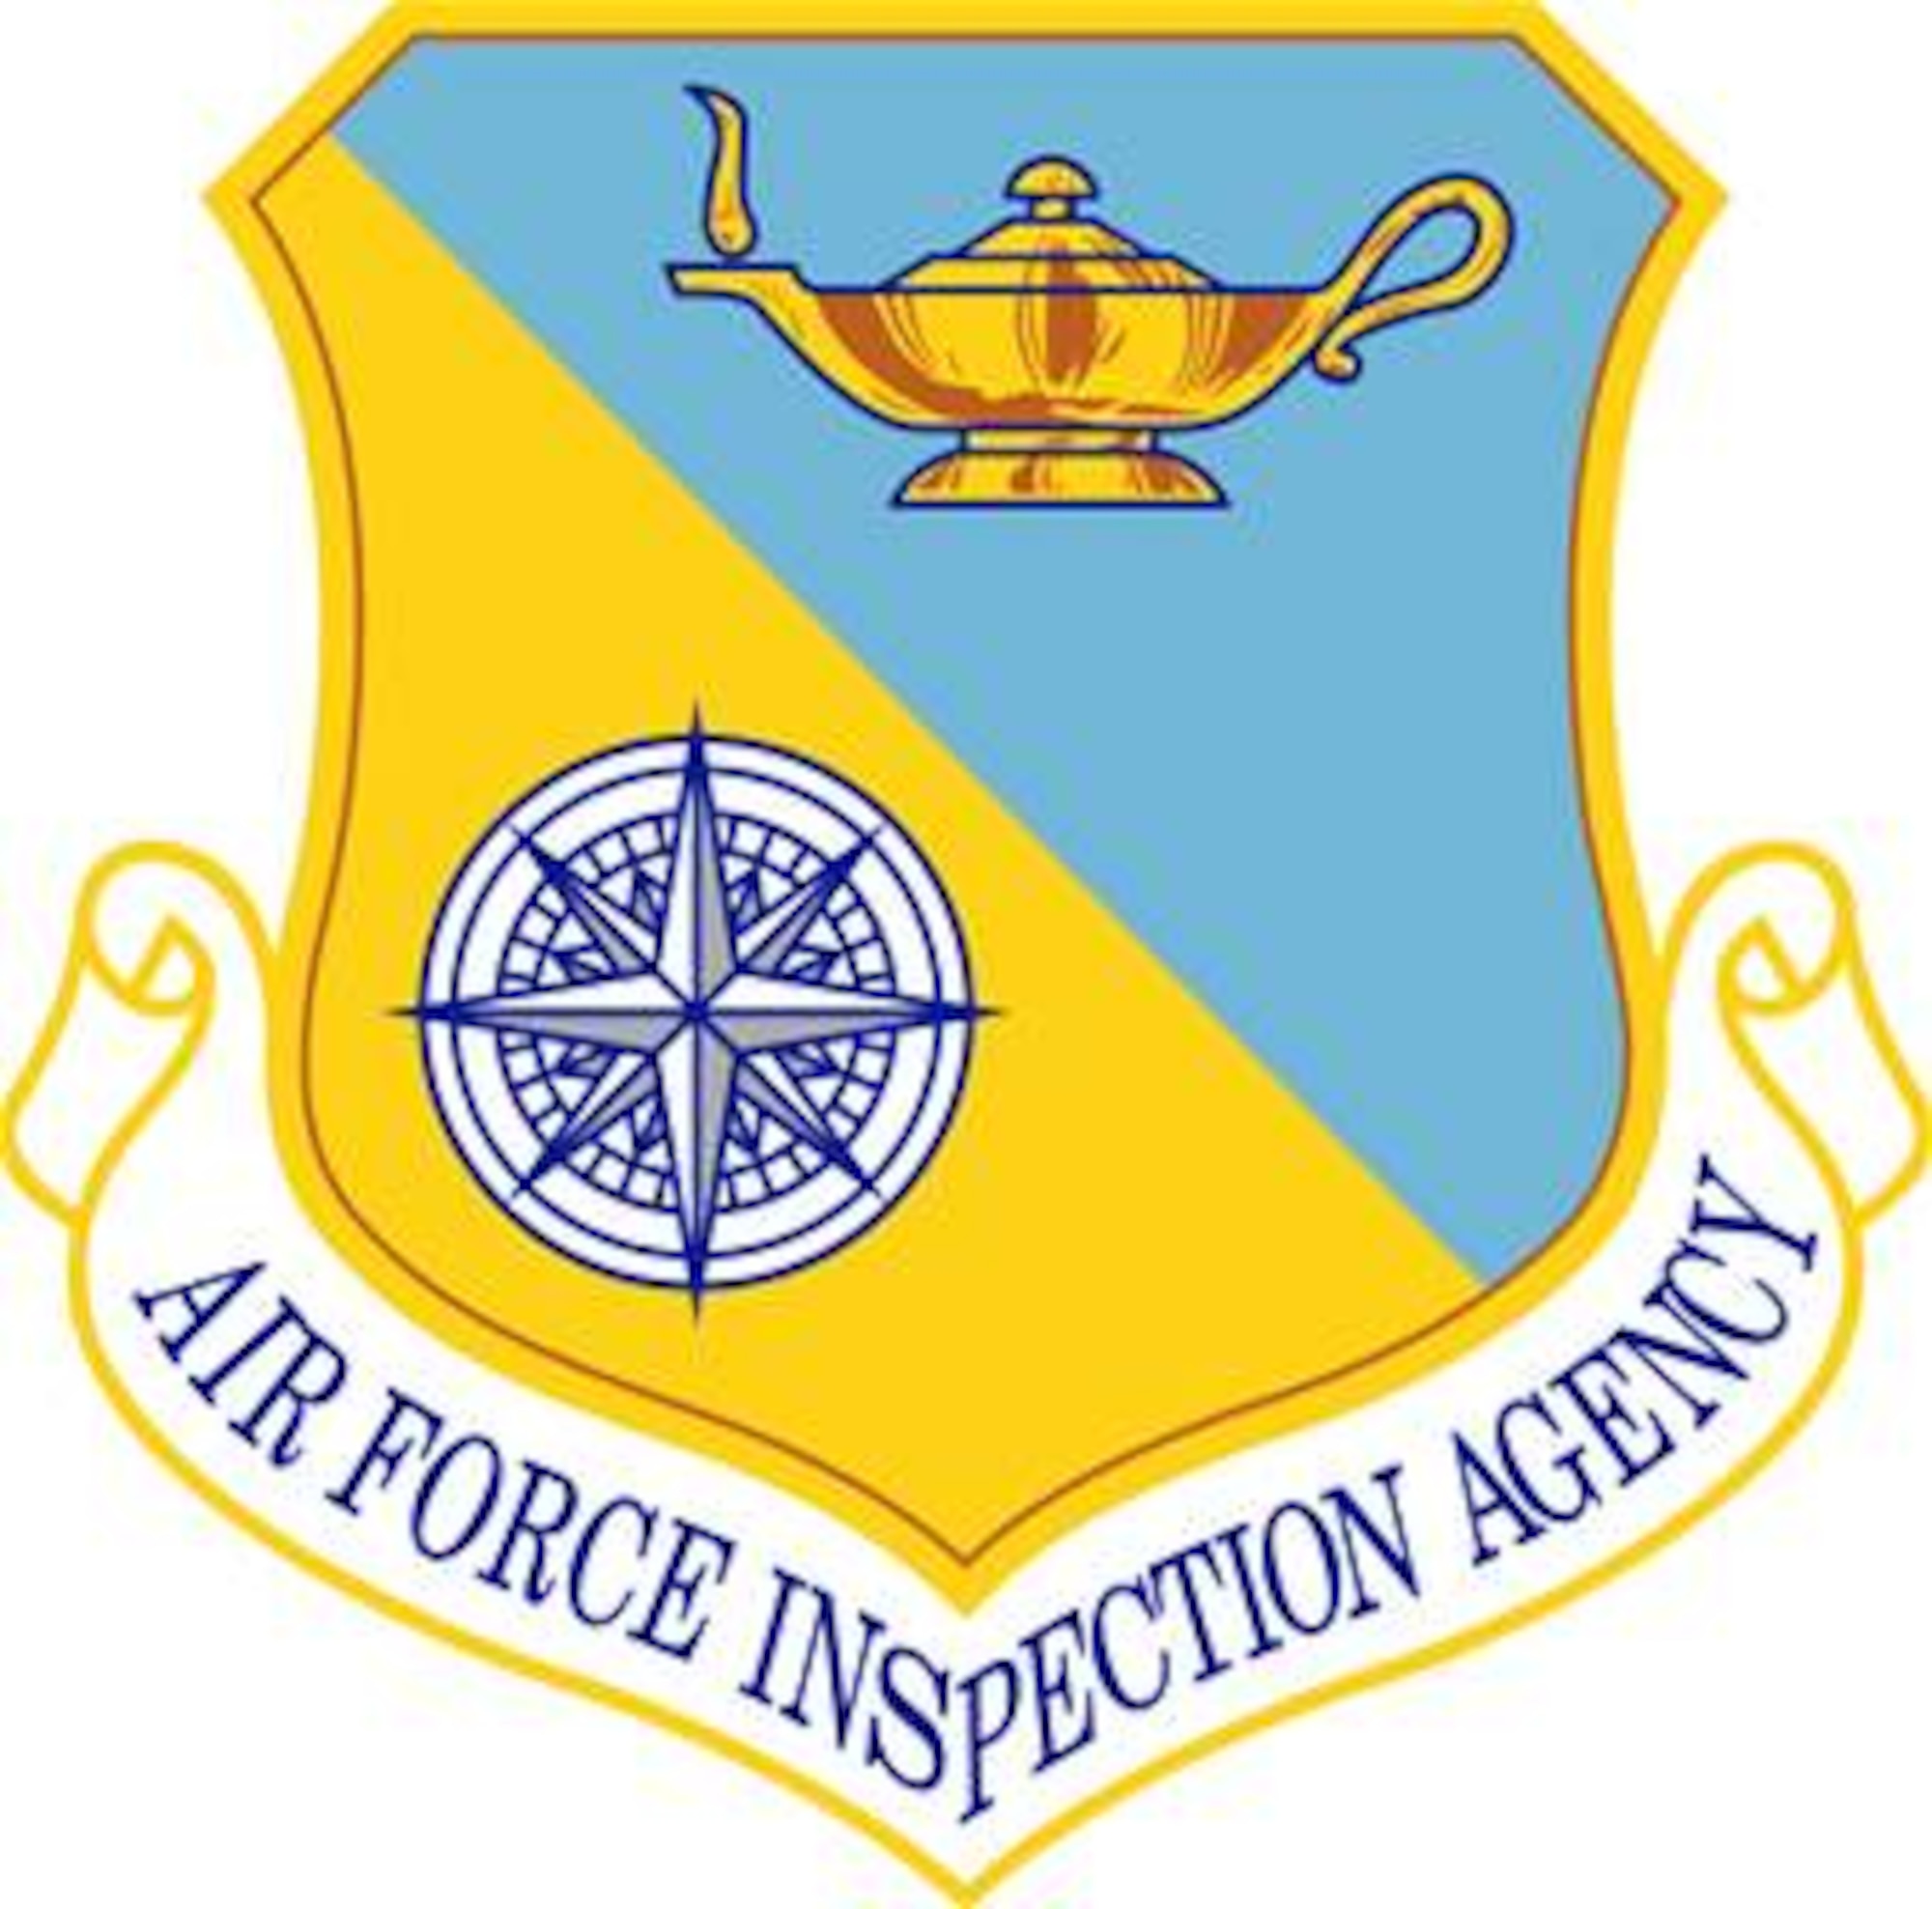 Air Force Inspection Agency shield (color), U.S. Air Force graphic.  In accordance with Chapter 3 of AFI 84-105, commercial reproduction of this emblem is NOT permitted without the permission of the proponent organizational/unit commander. 